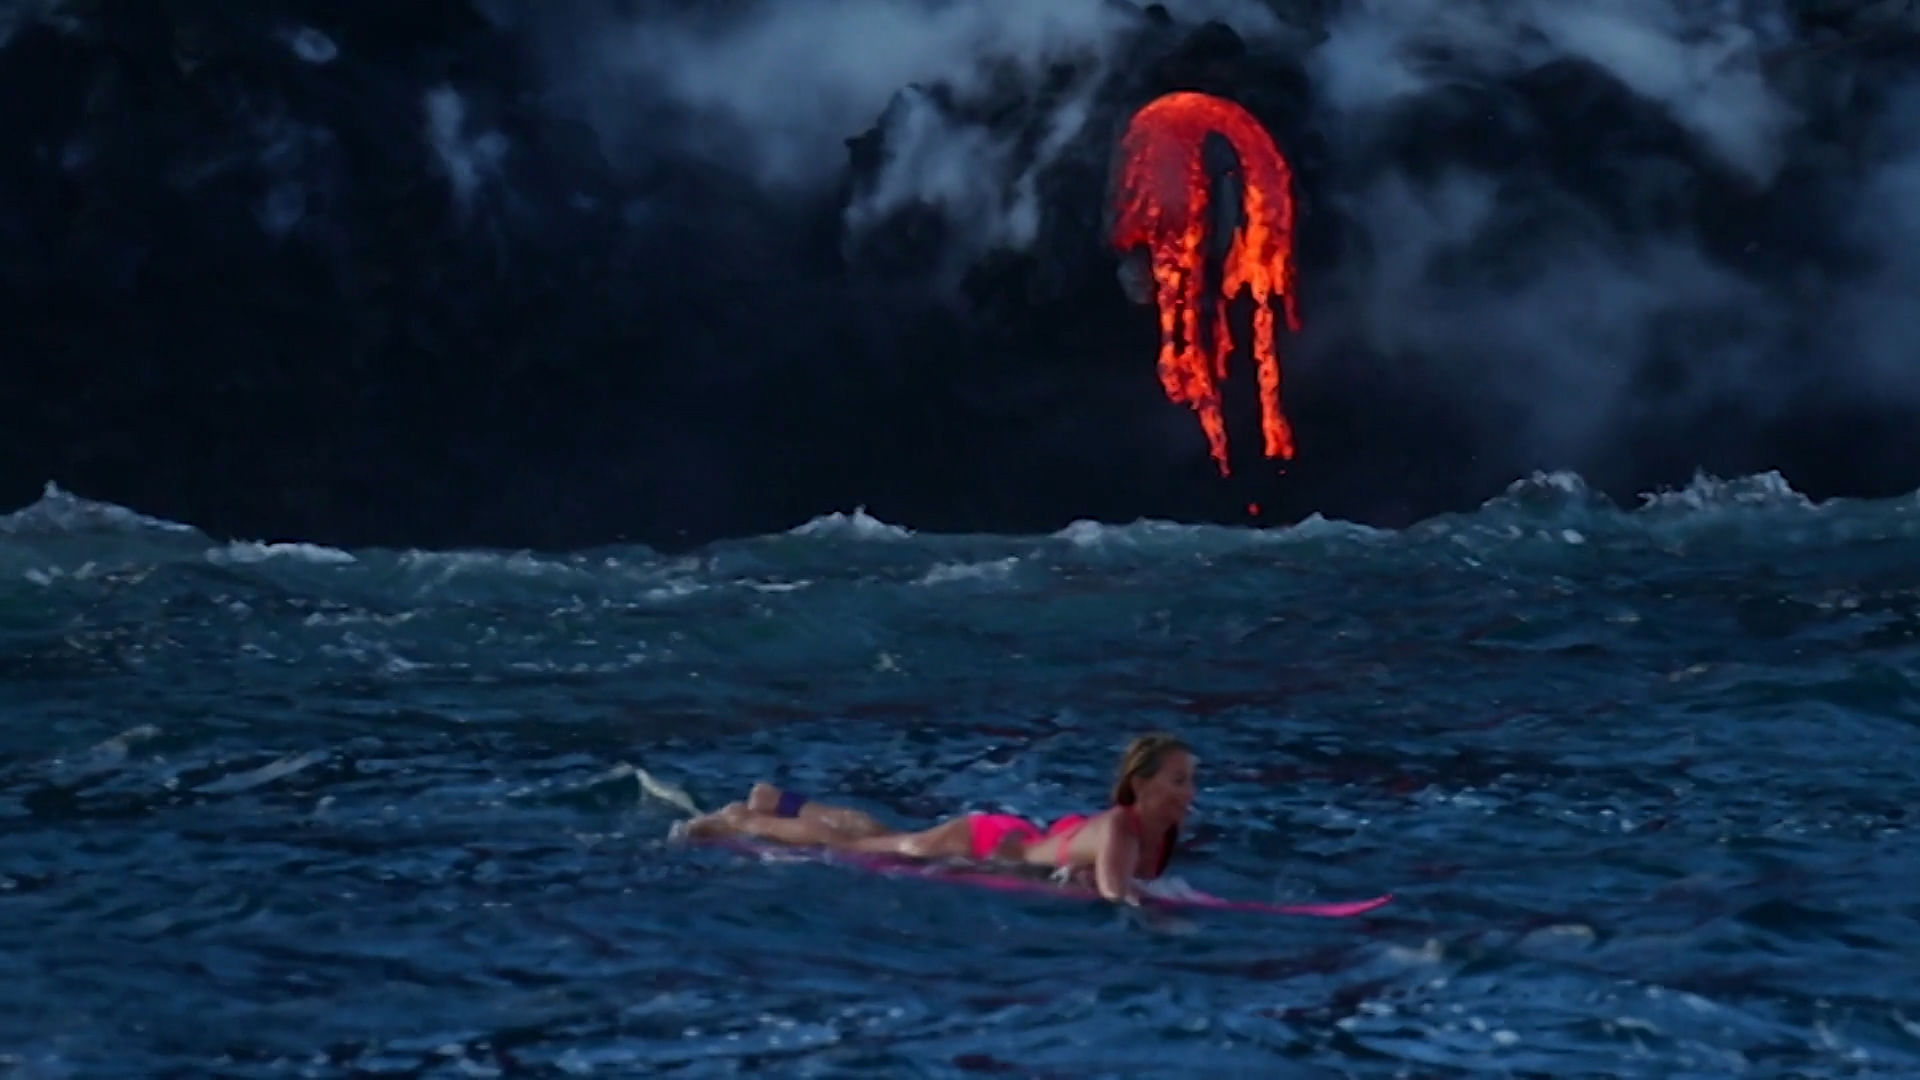 Professional adventurer Alison Teal surfs at the base of an erupting volcano (Photo: AP)